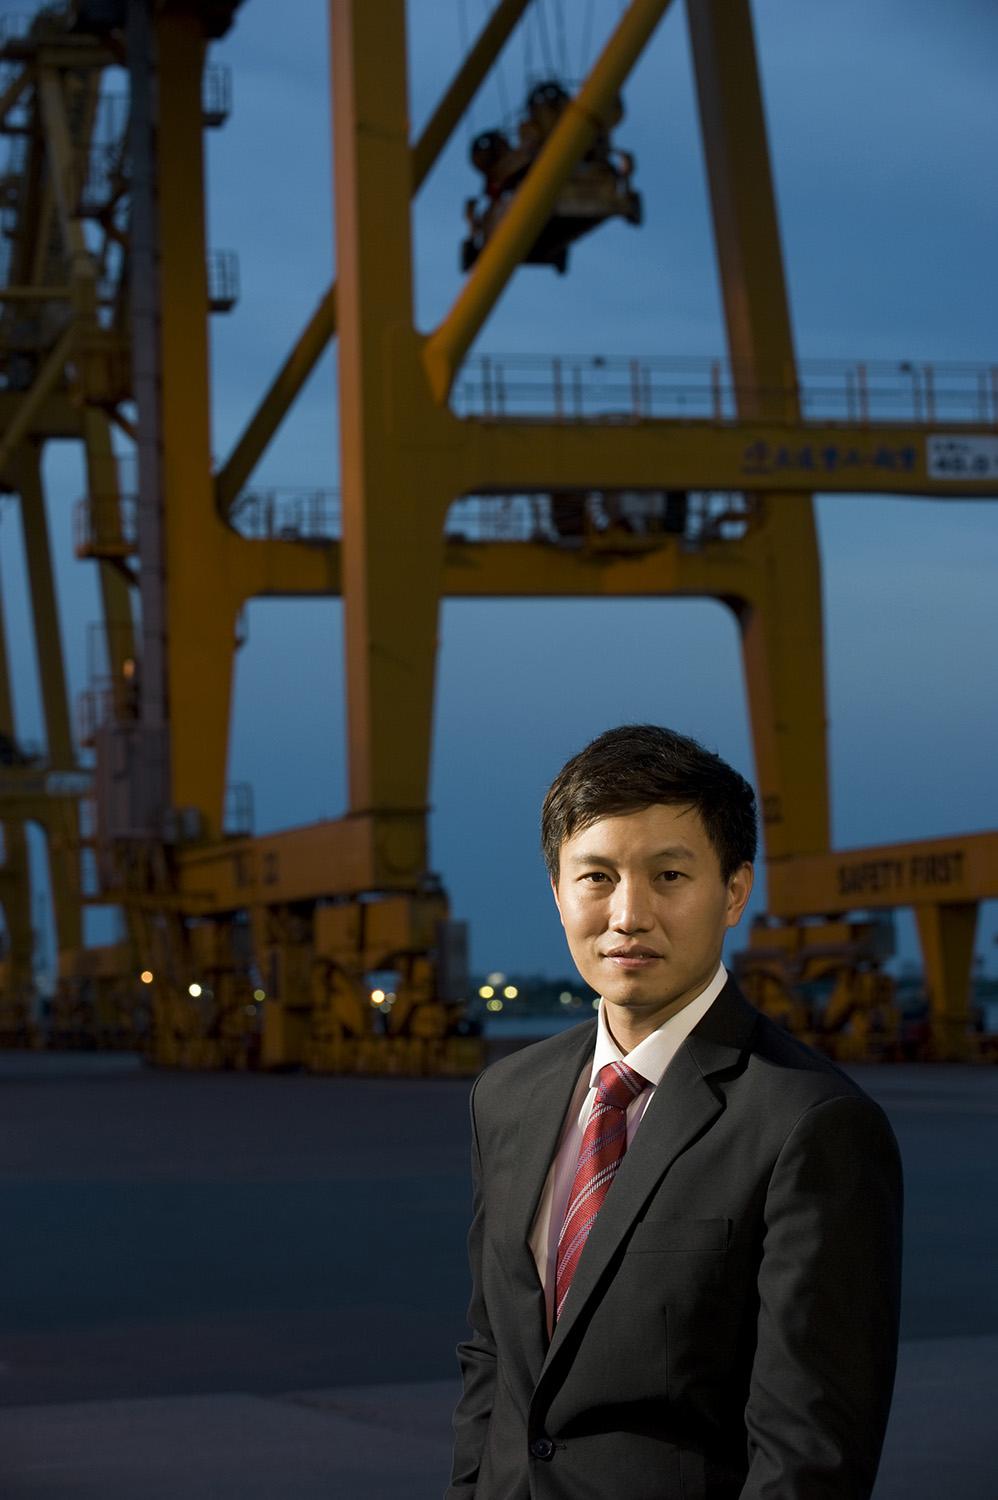 Portrait of Chalermchai Mahagitsiri, CEO of the PM Group Company Limited at the main cargo port in Khlong Toei Bangkok. The PM Group recently took over Thoresen Thai Agencies, one of Thailand’s biggest shipping companies.